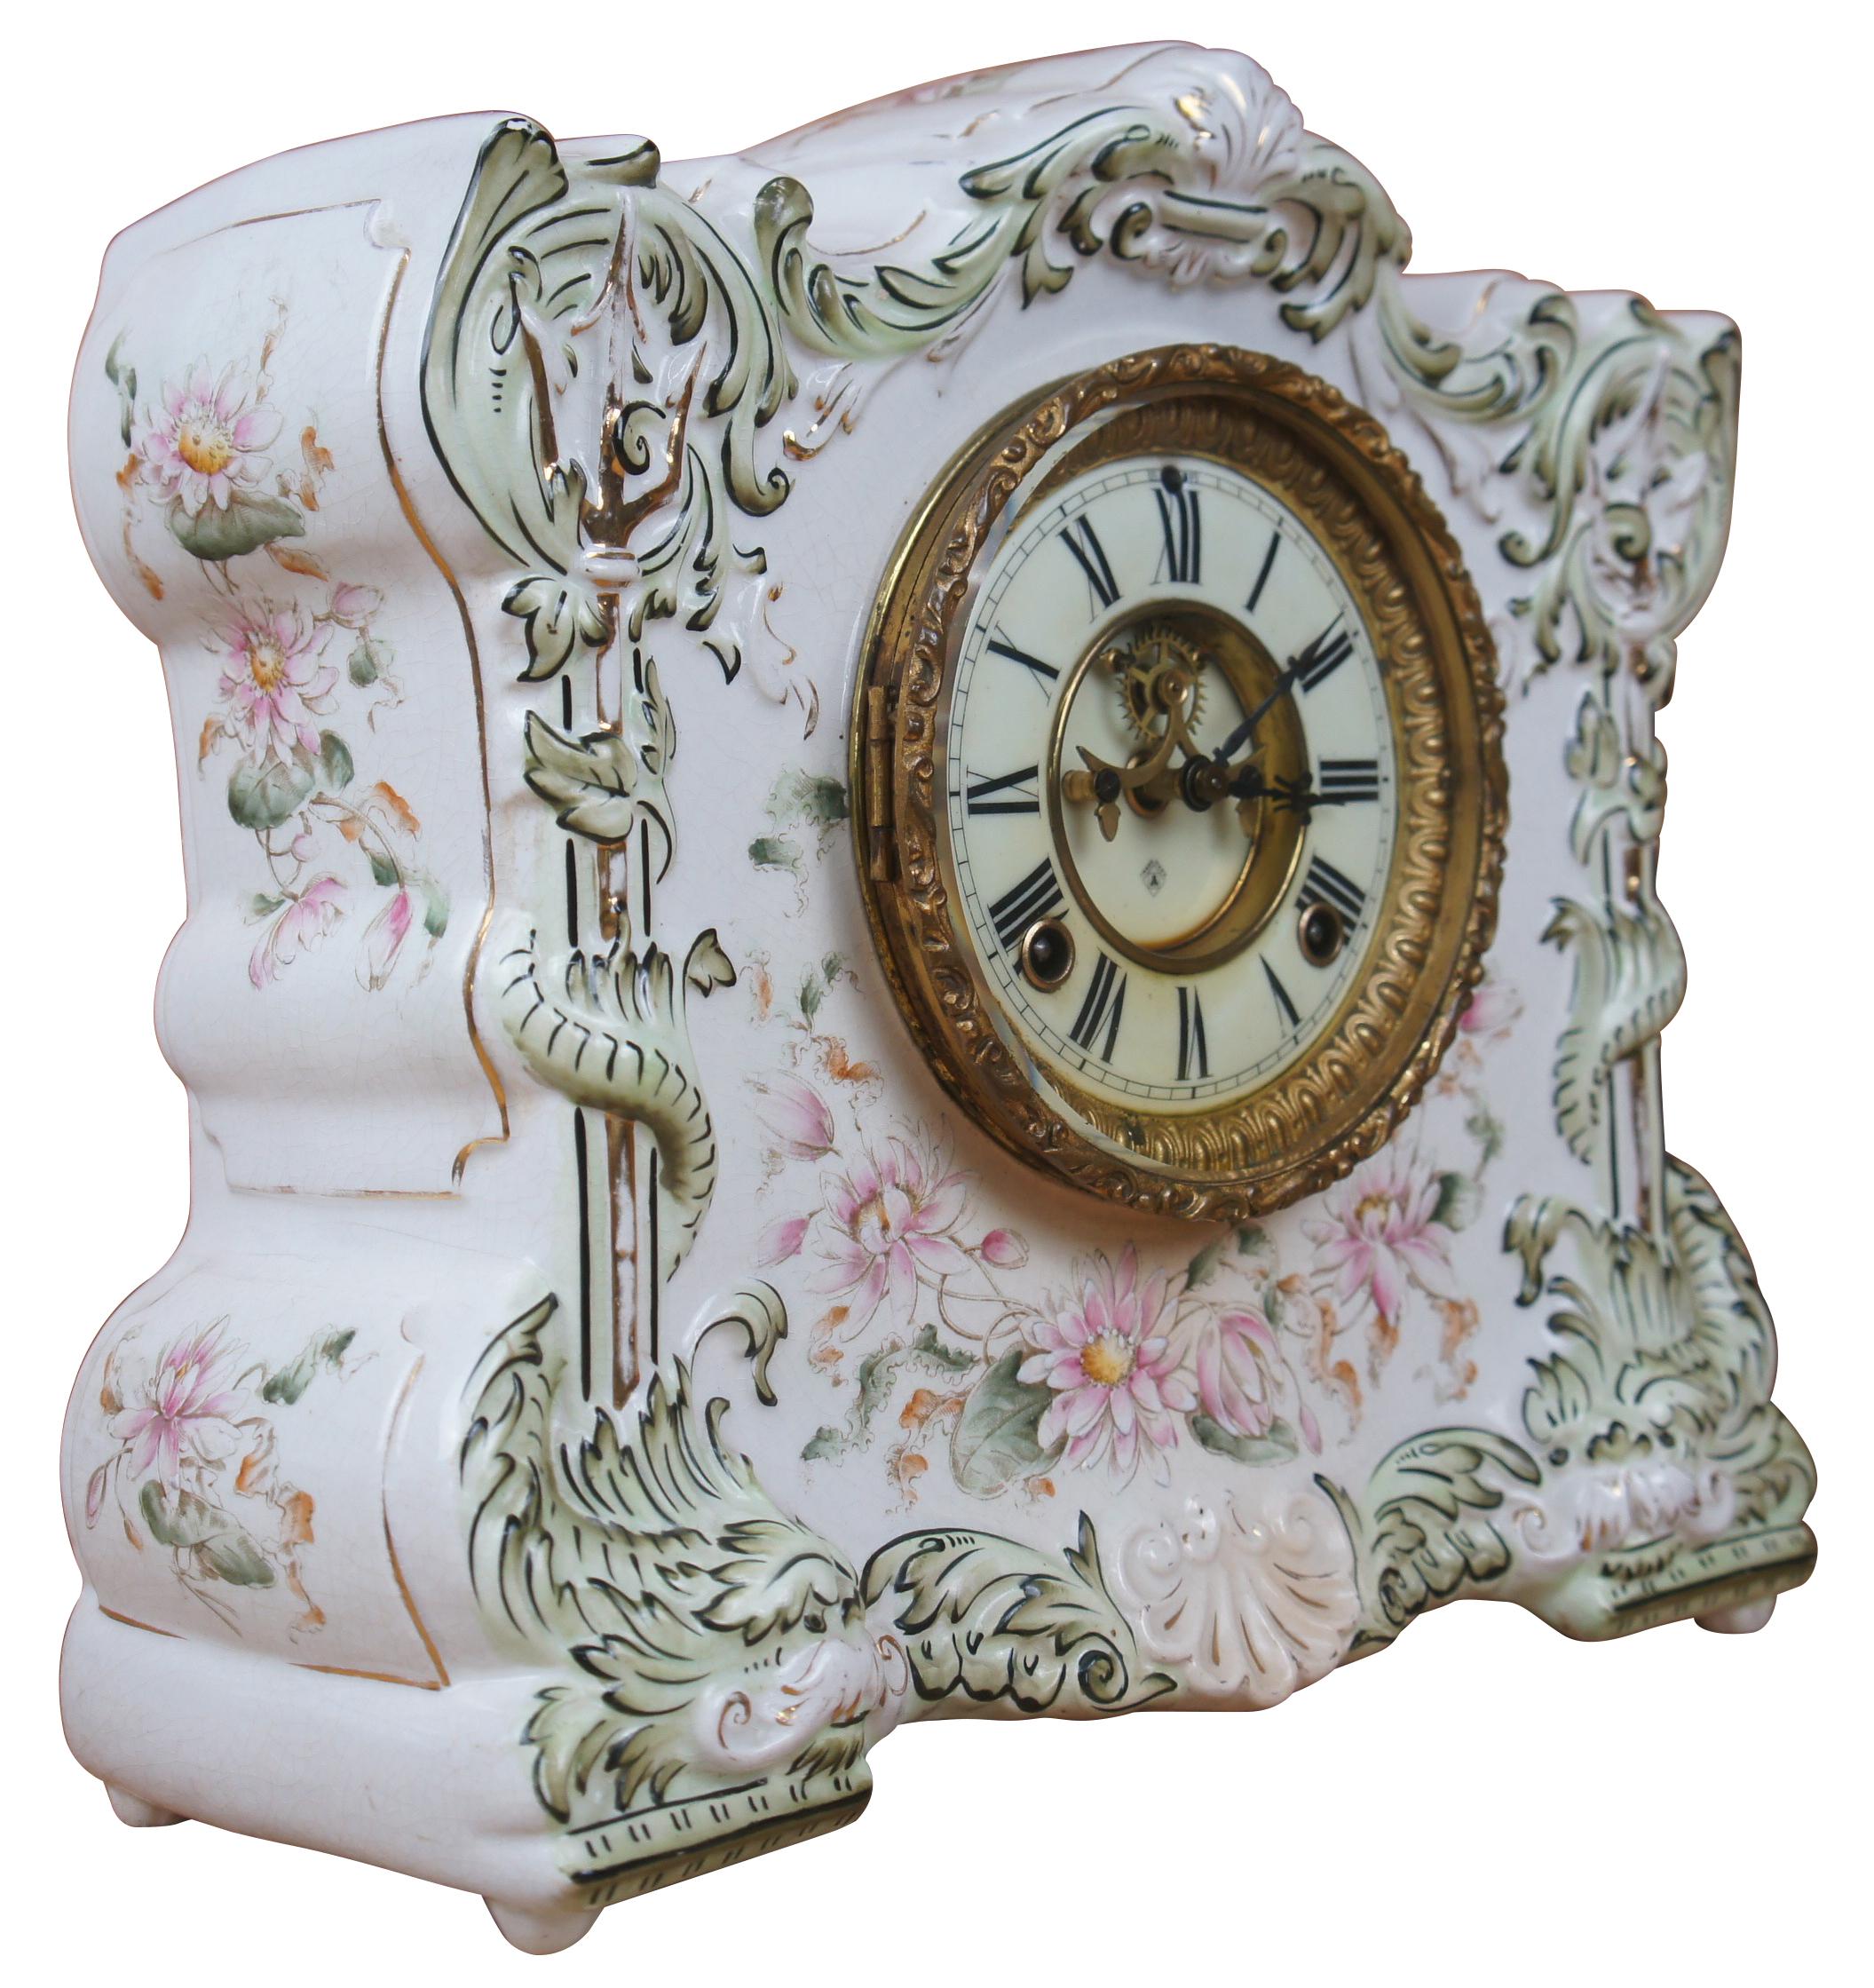 Vintage porcelain mantel clock with hand painted floral and gilt motif and open escapment by Ansonia Osceola Royal Bonn.
   